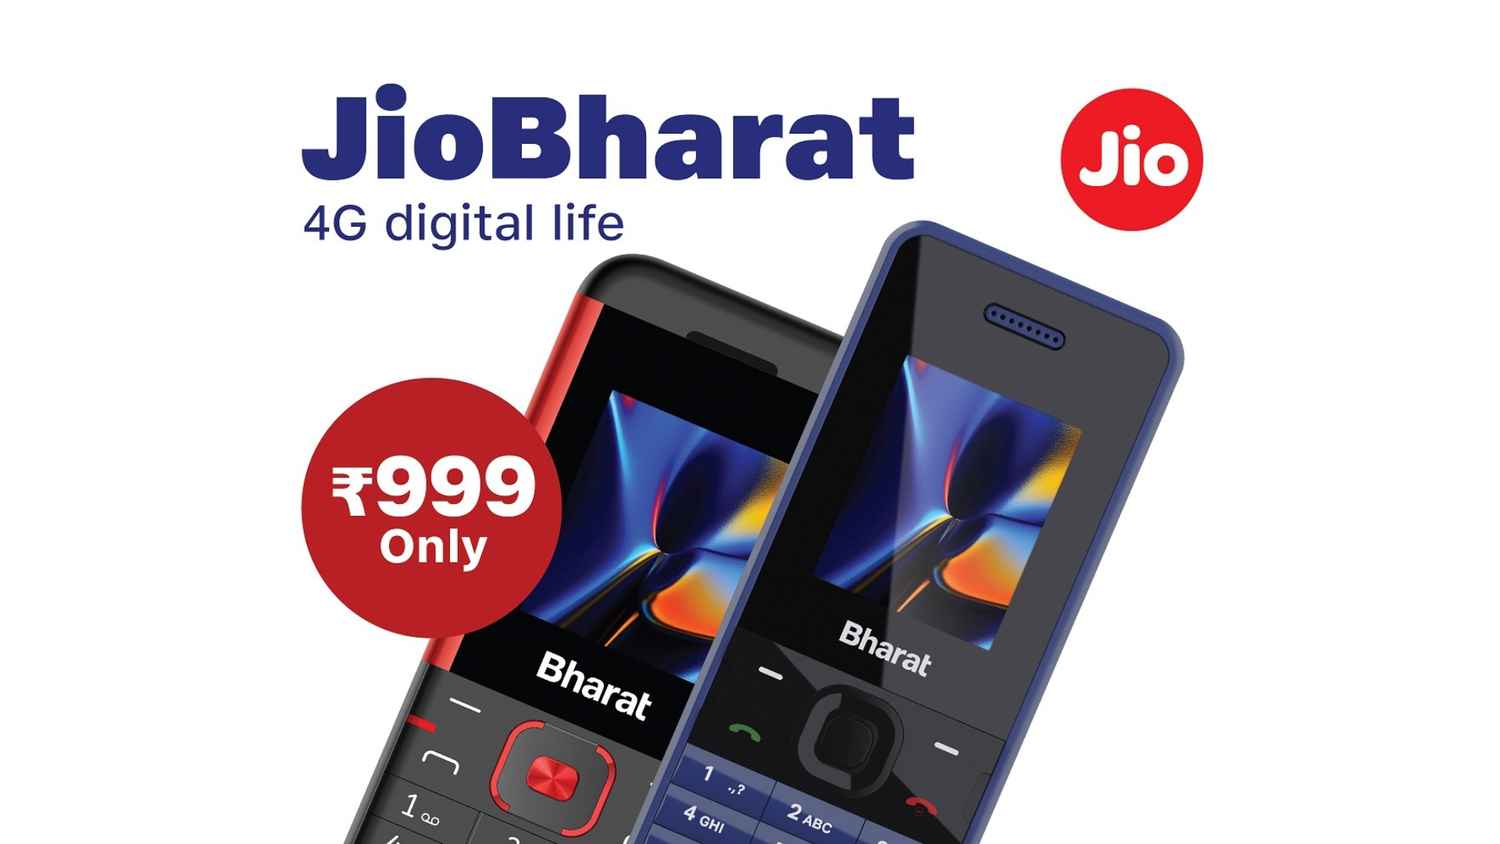 Jio Bharat Phone: New 4G-enabled feature phone from Reliance for Rs 999